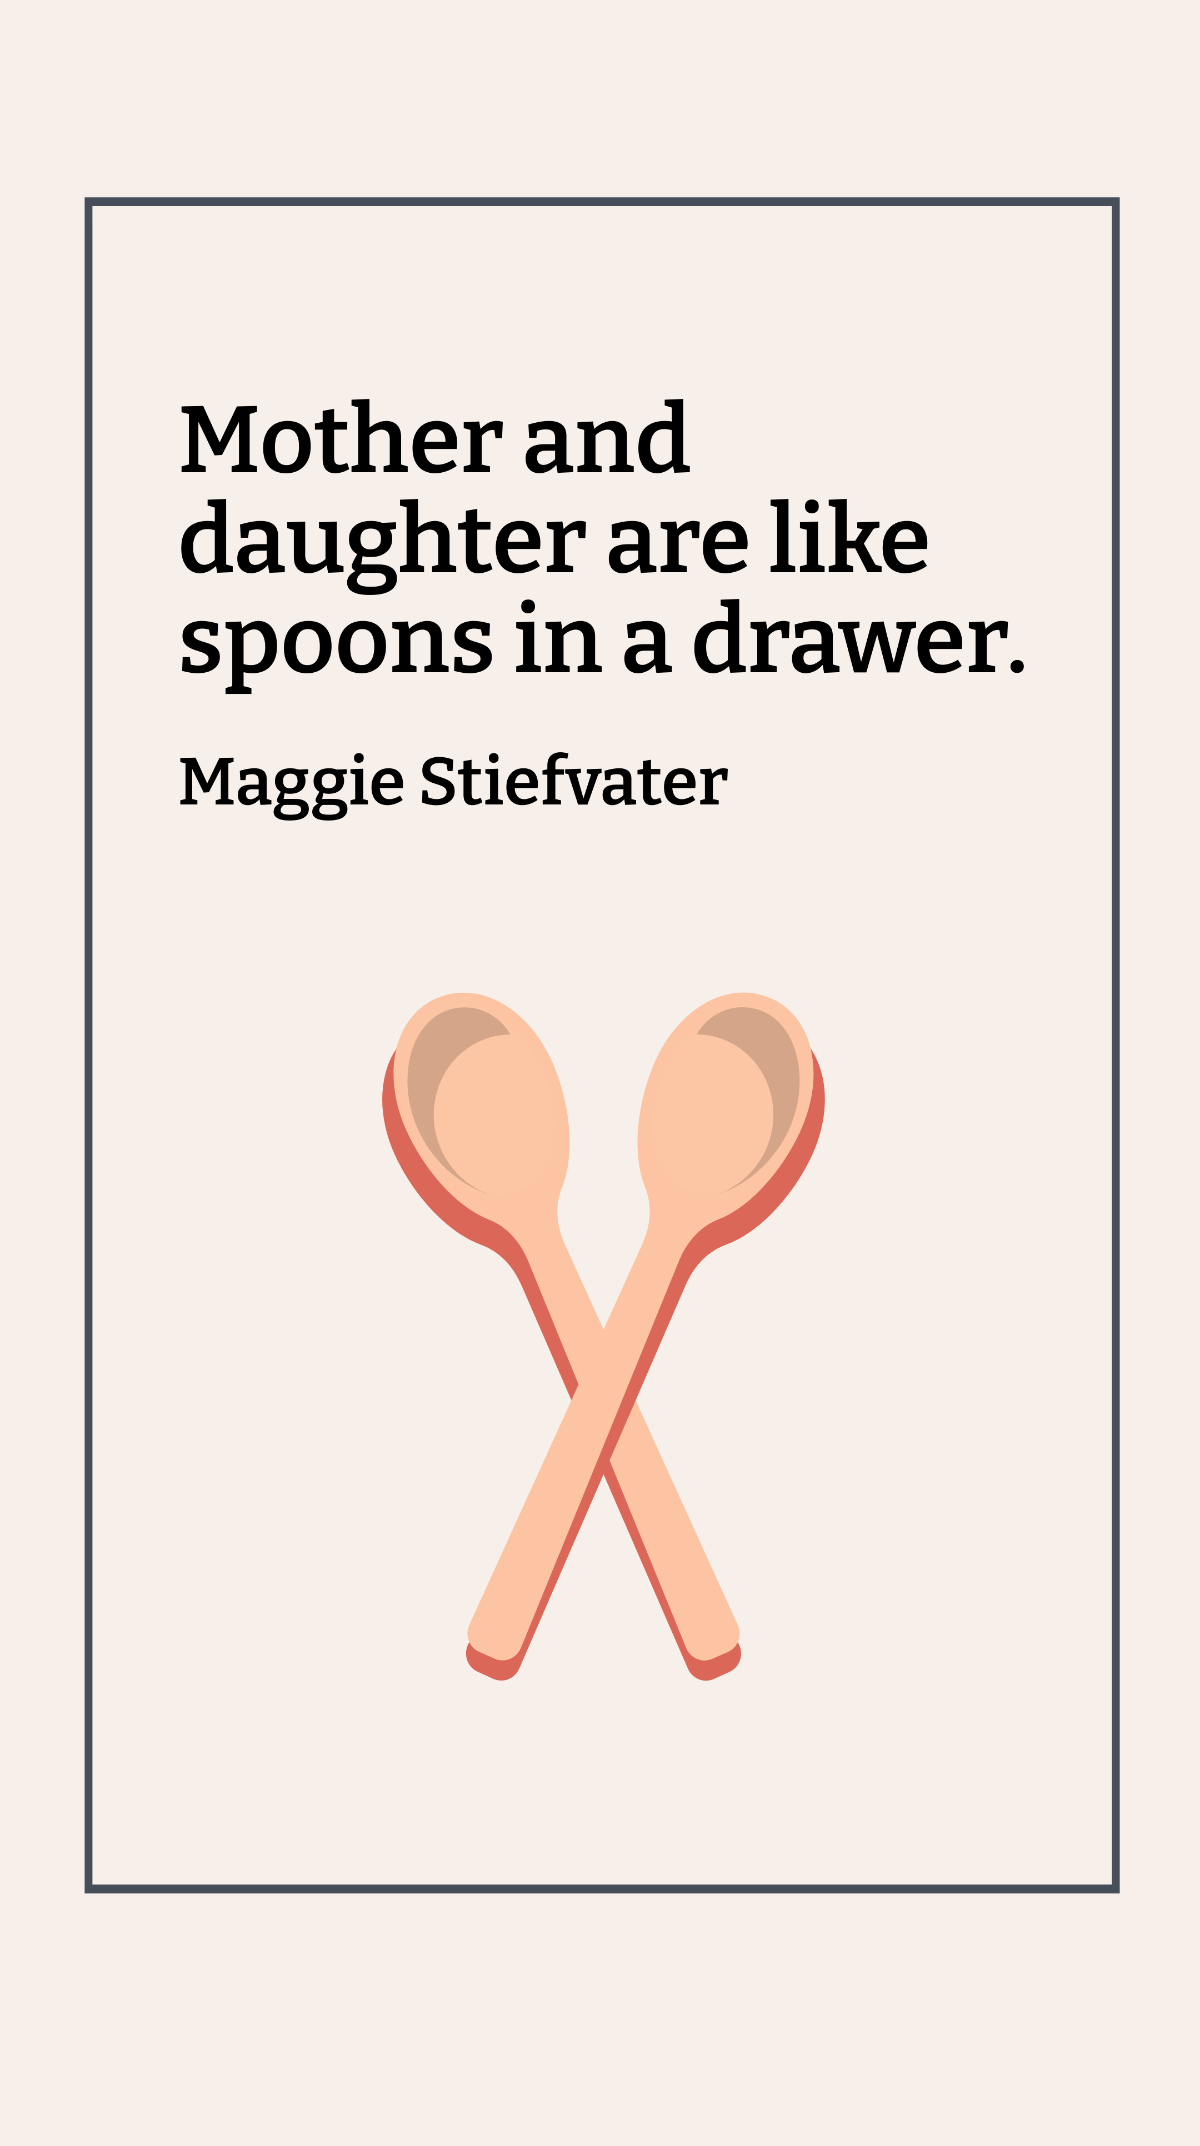 Free Maggie Stiefvater - Mother and daughter are like spoons in a drawer. Template